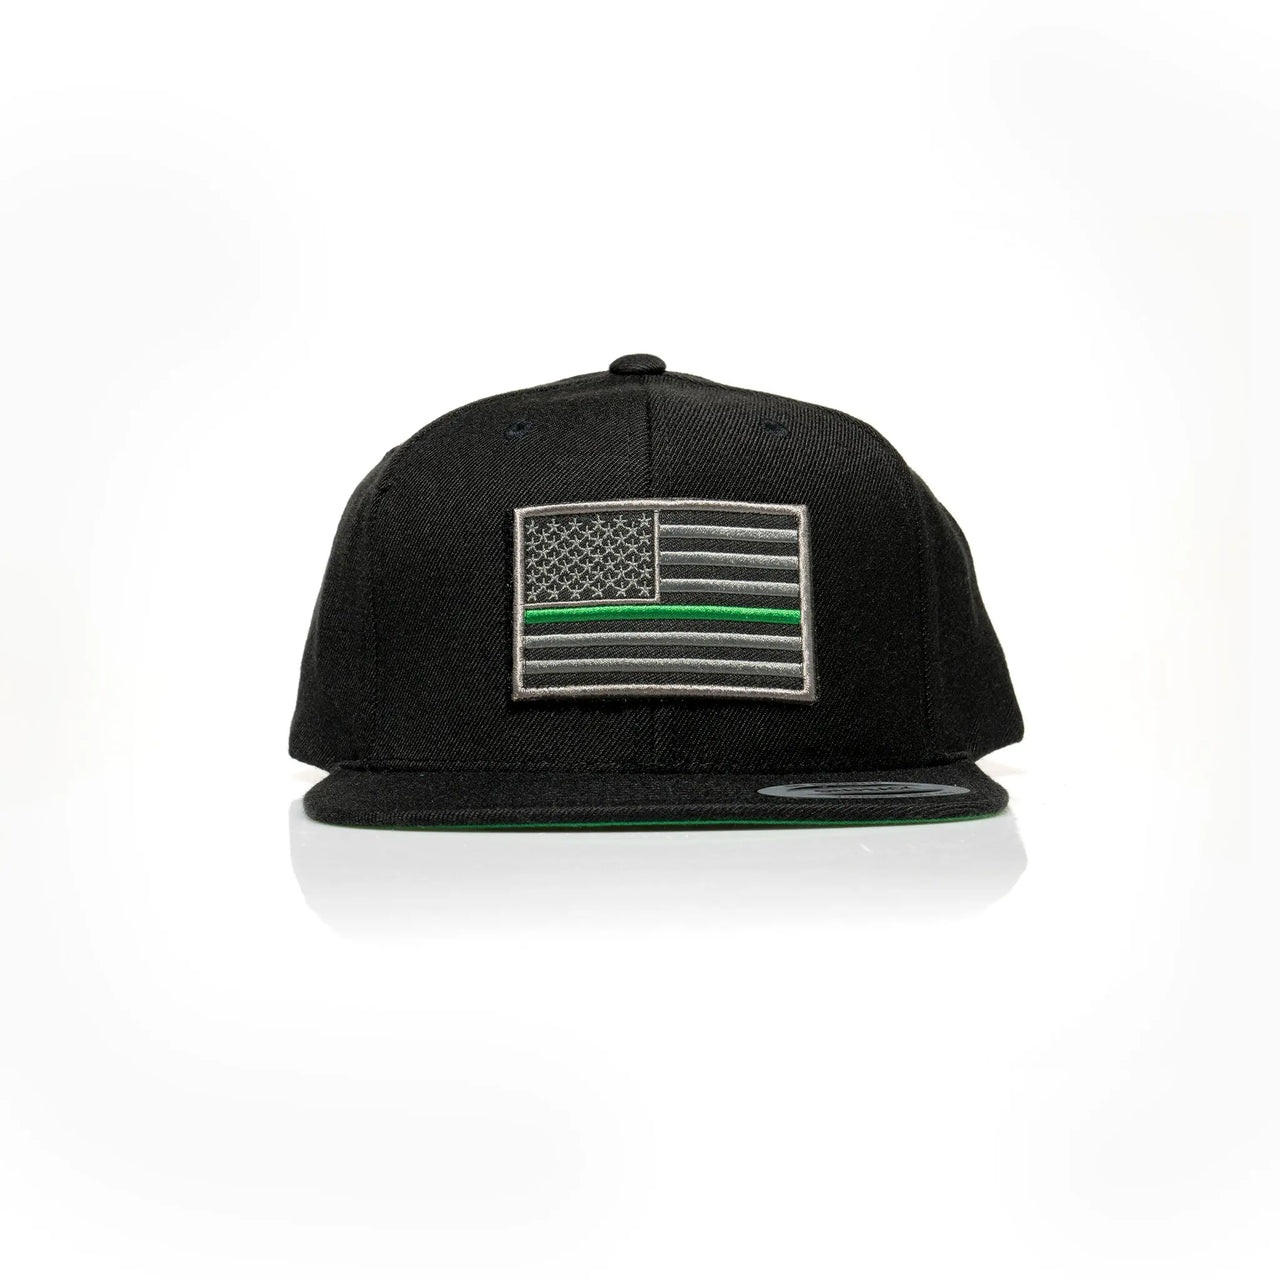 Thin Green Line Patch Snapback